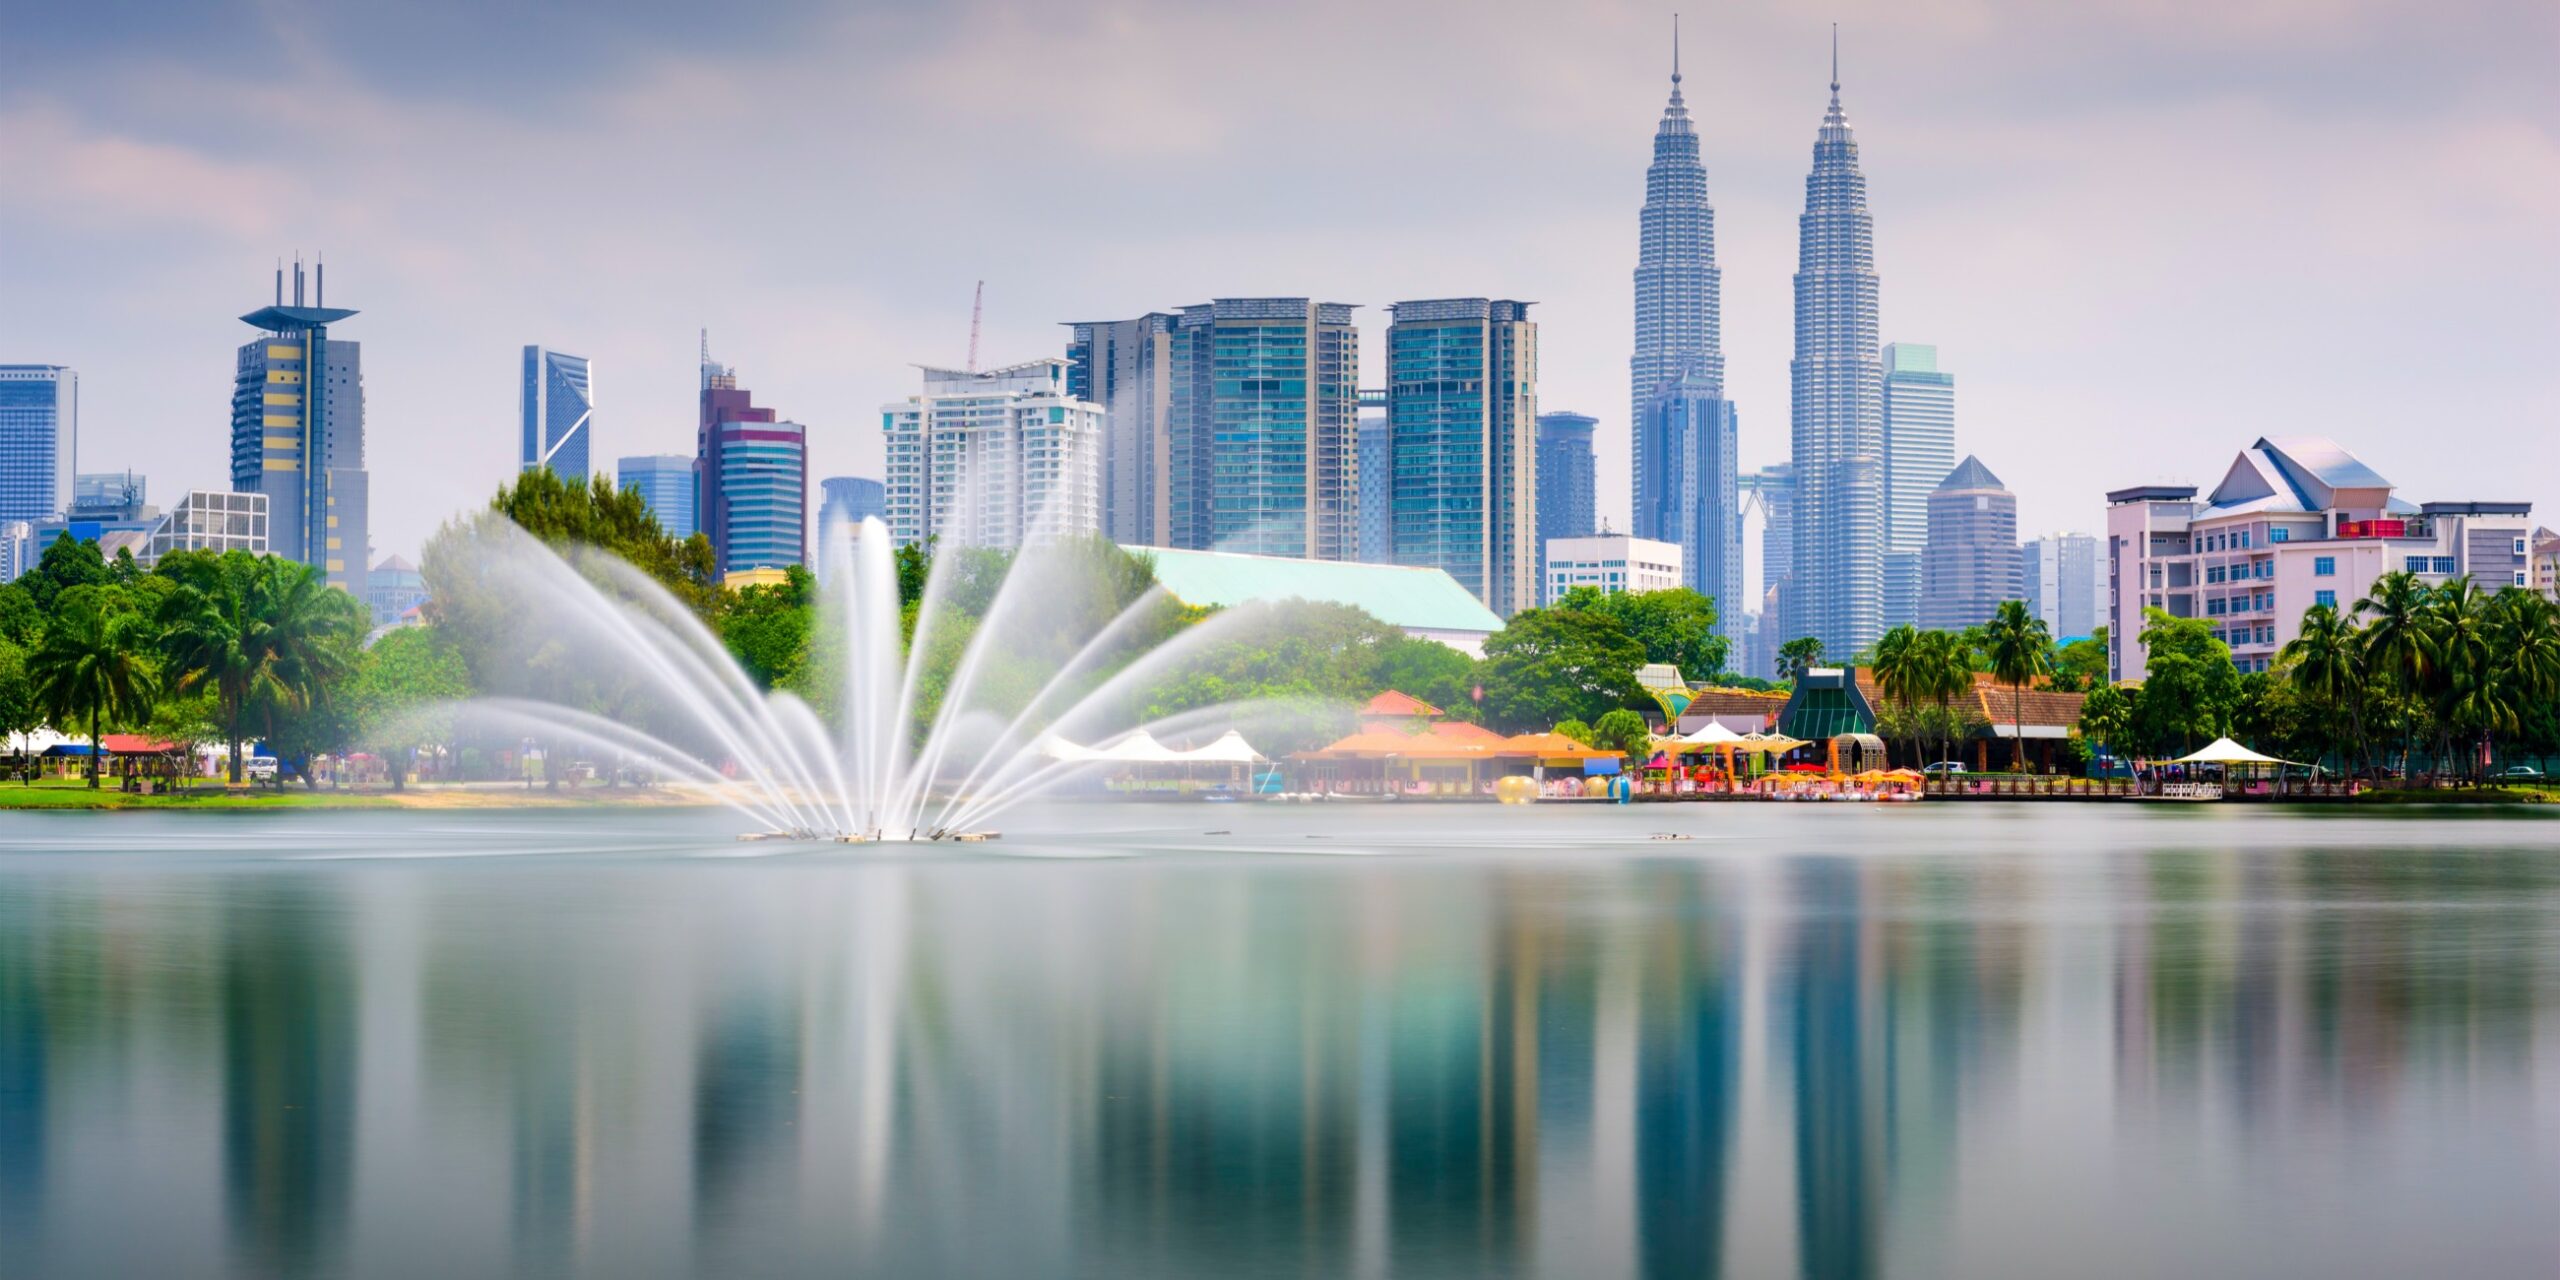 Welcome to Kuala Lumpur – A City of Extremes: 4 Things to do